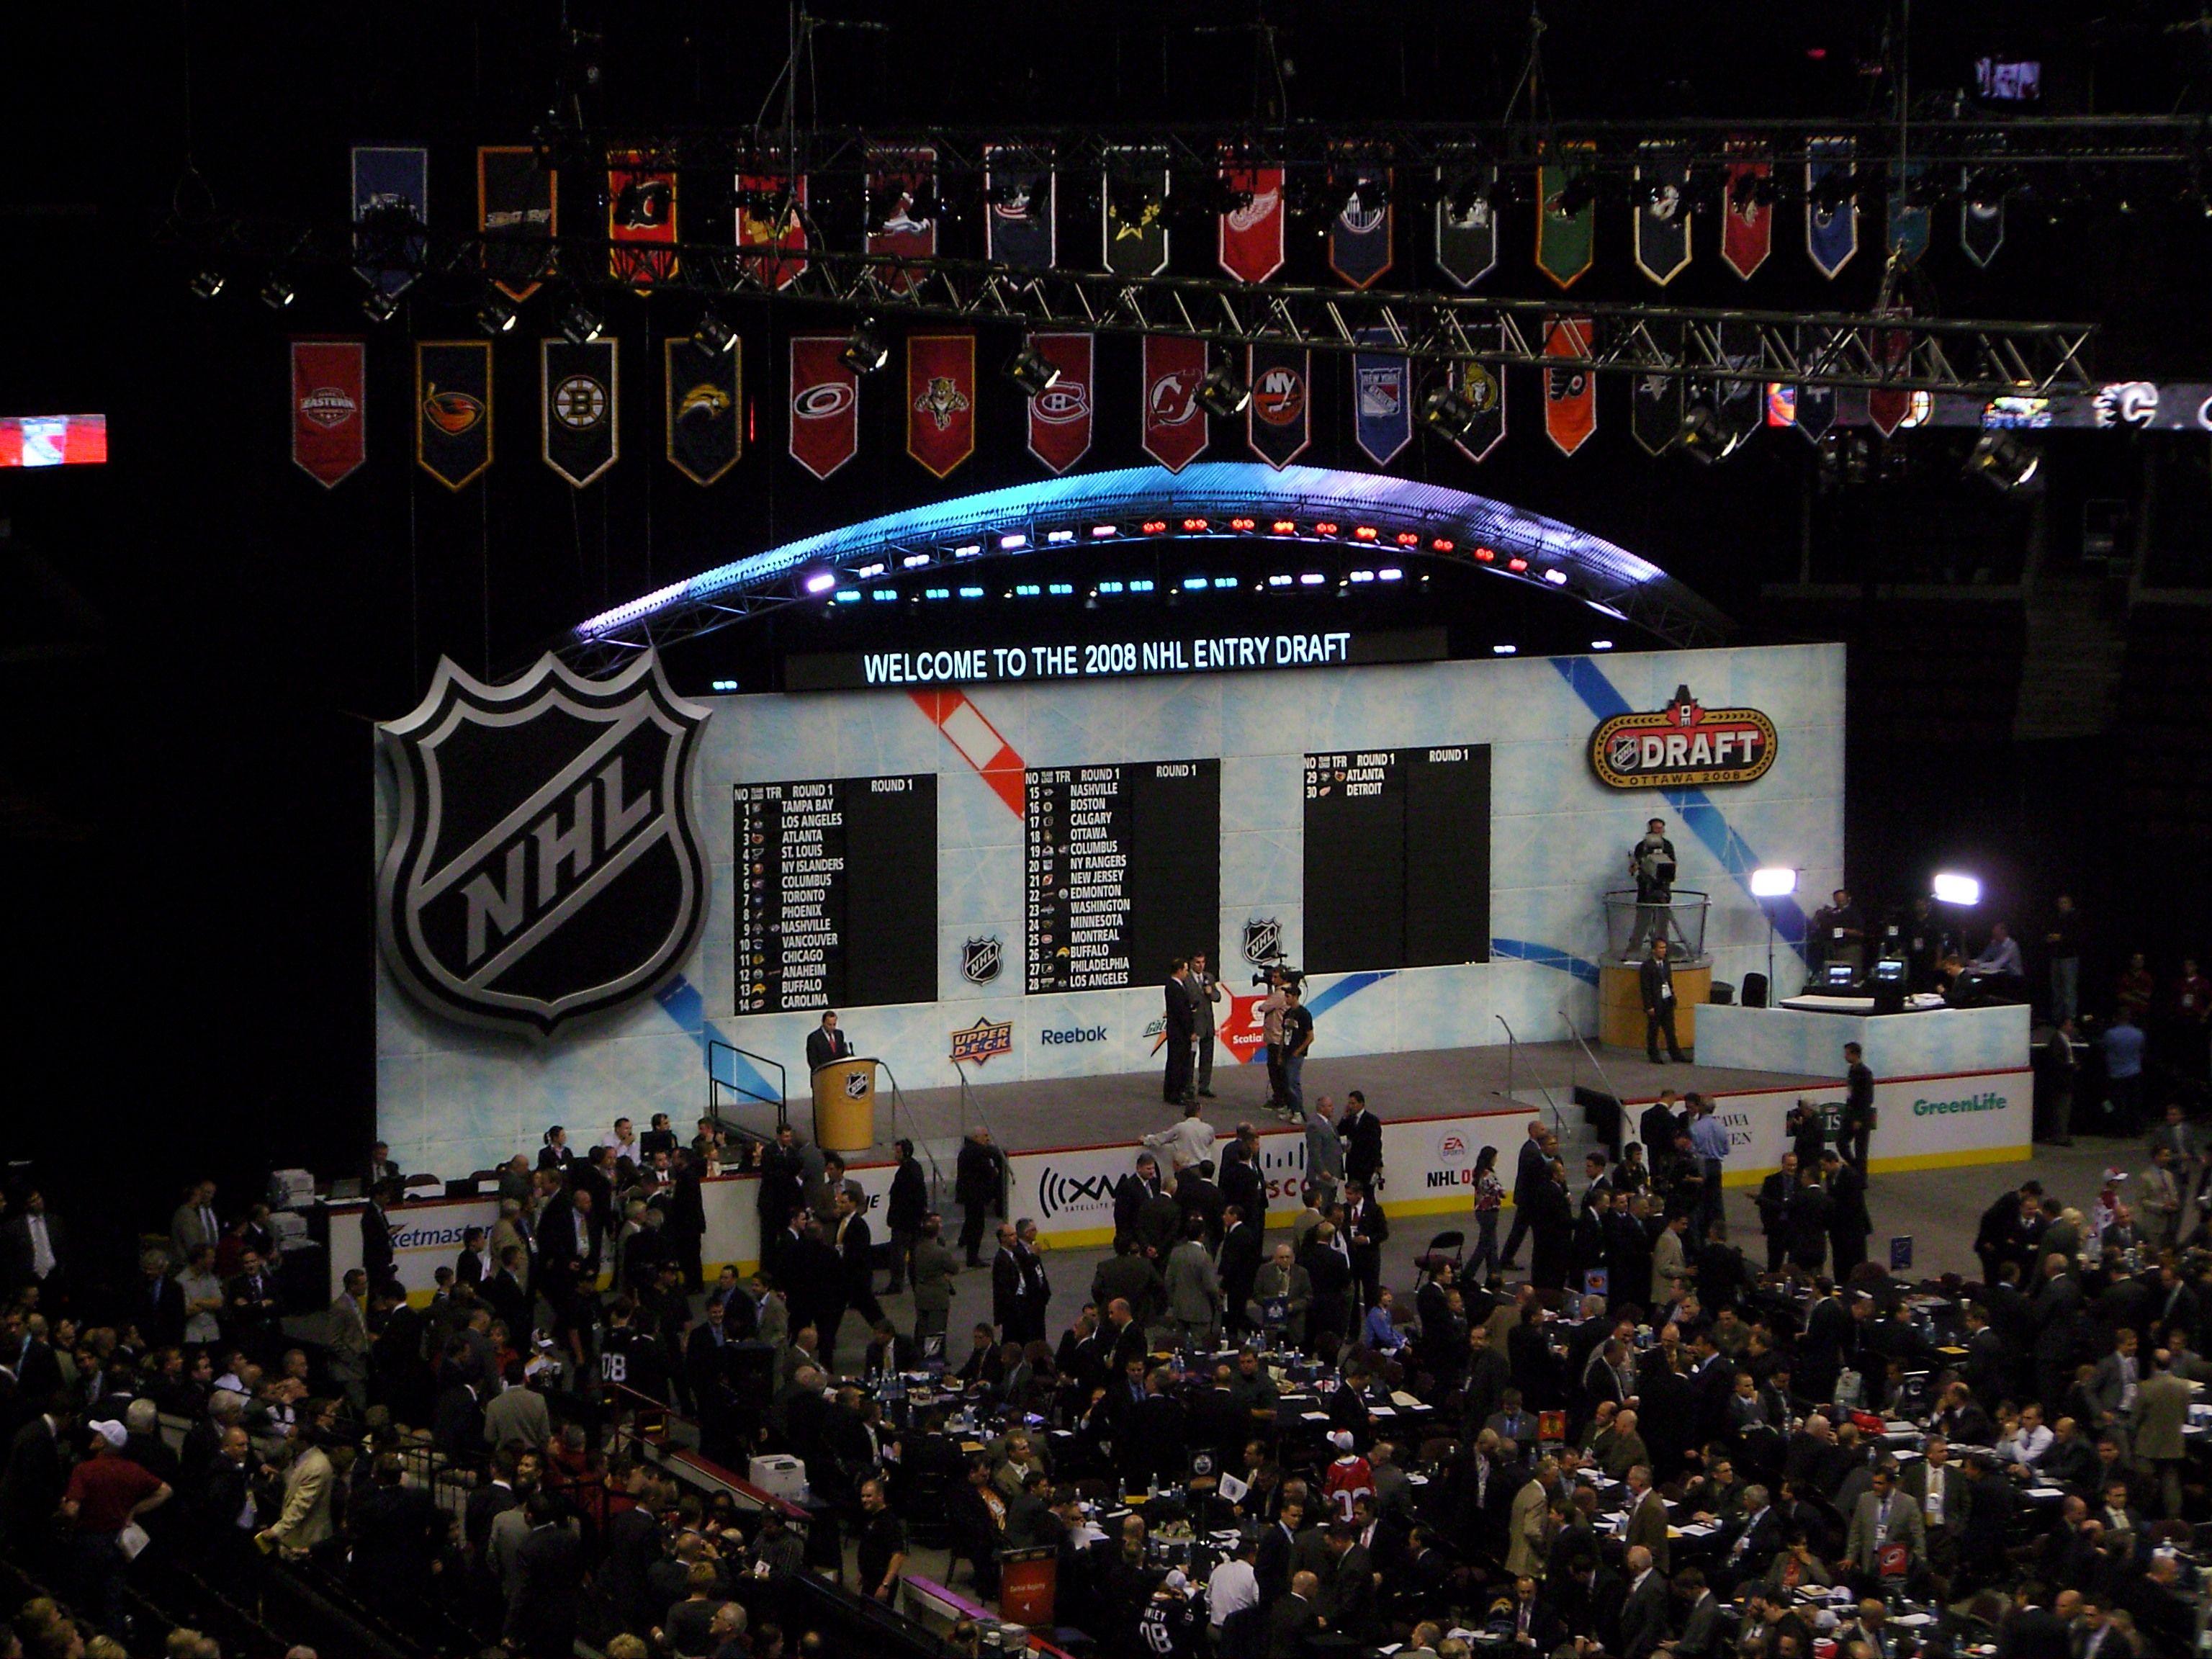 The NHL draft of 2008 was held at Scotiabank Place in Ottawa, Canada. (Creative Commons)